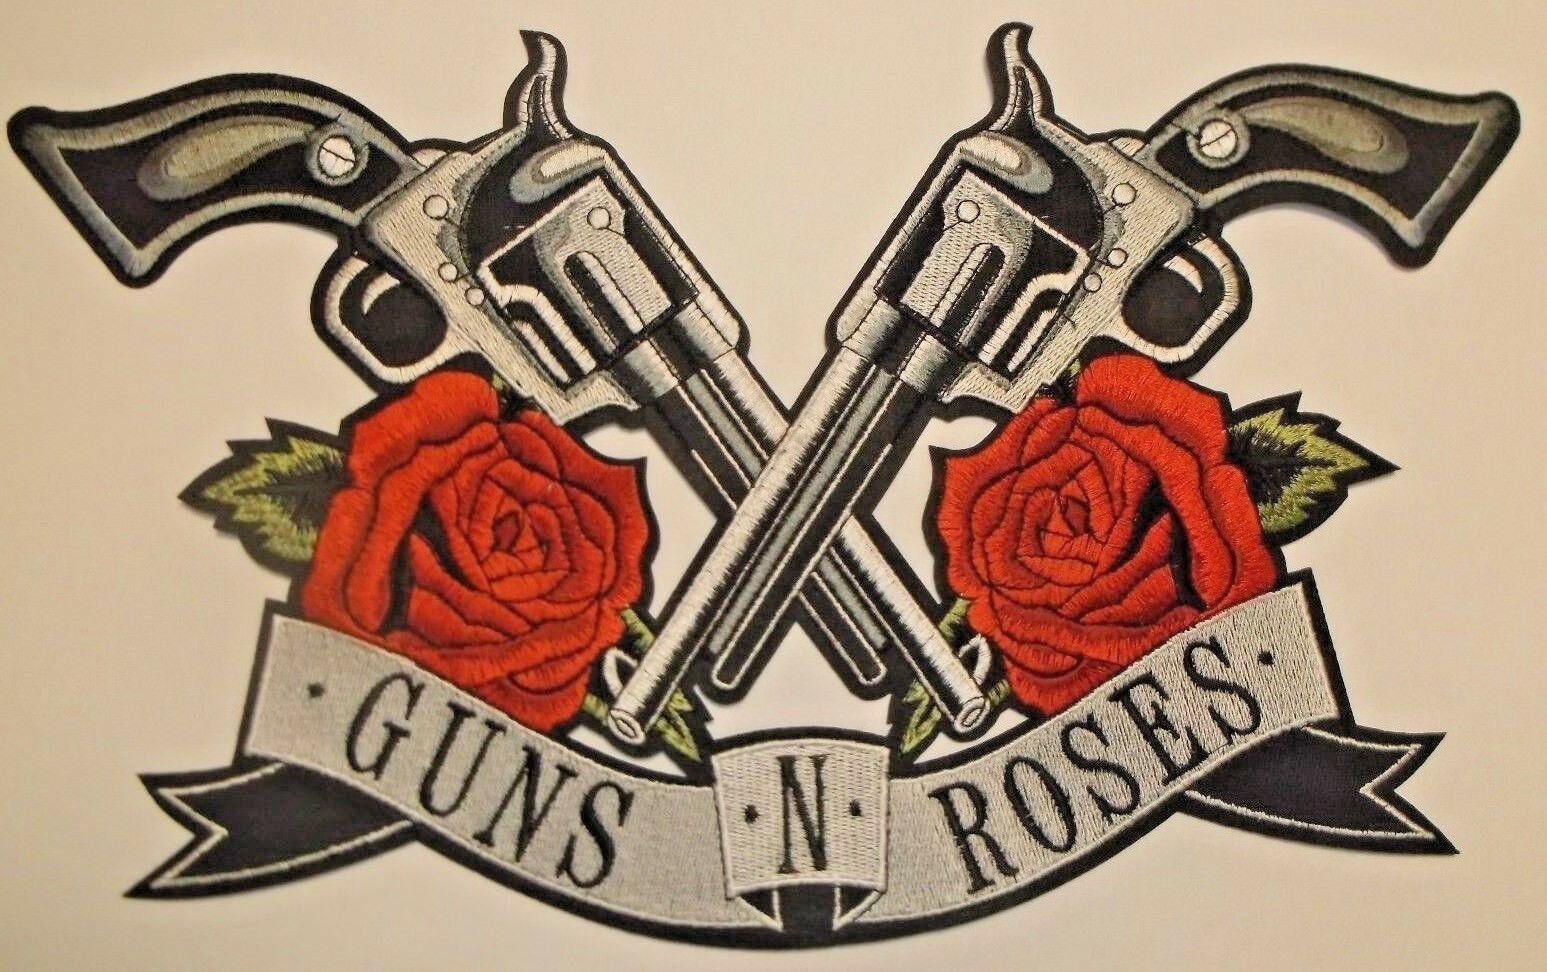 Guns N' Roses~Cross Pistols Revolvers Patch (14 x 8 1/2) Embroidered~Iron On